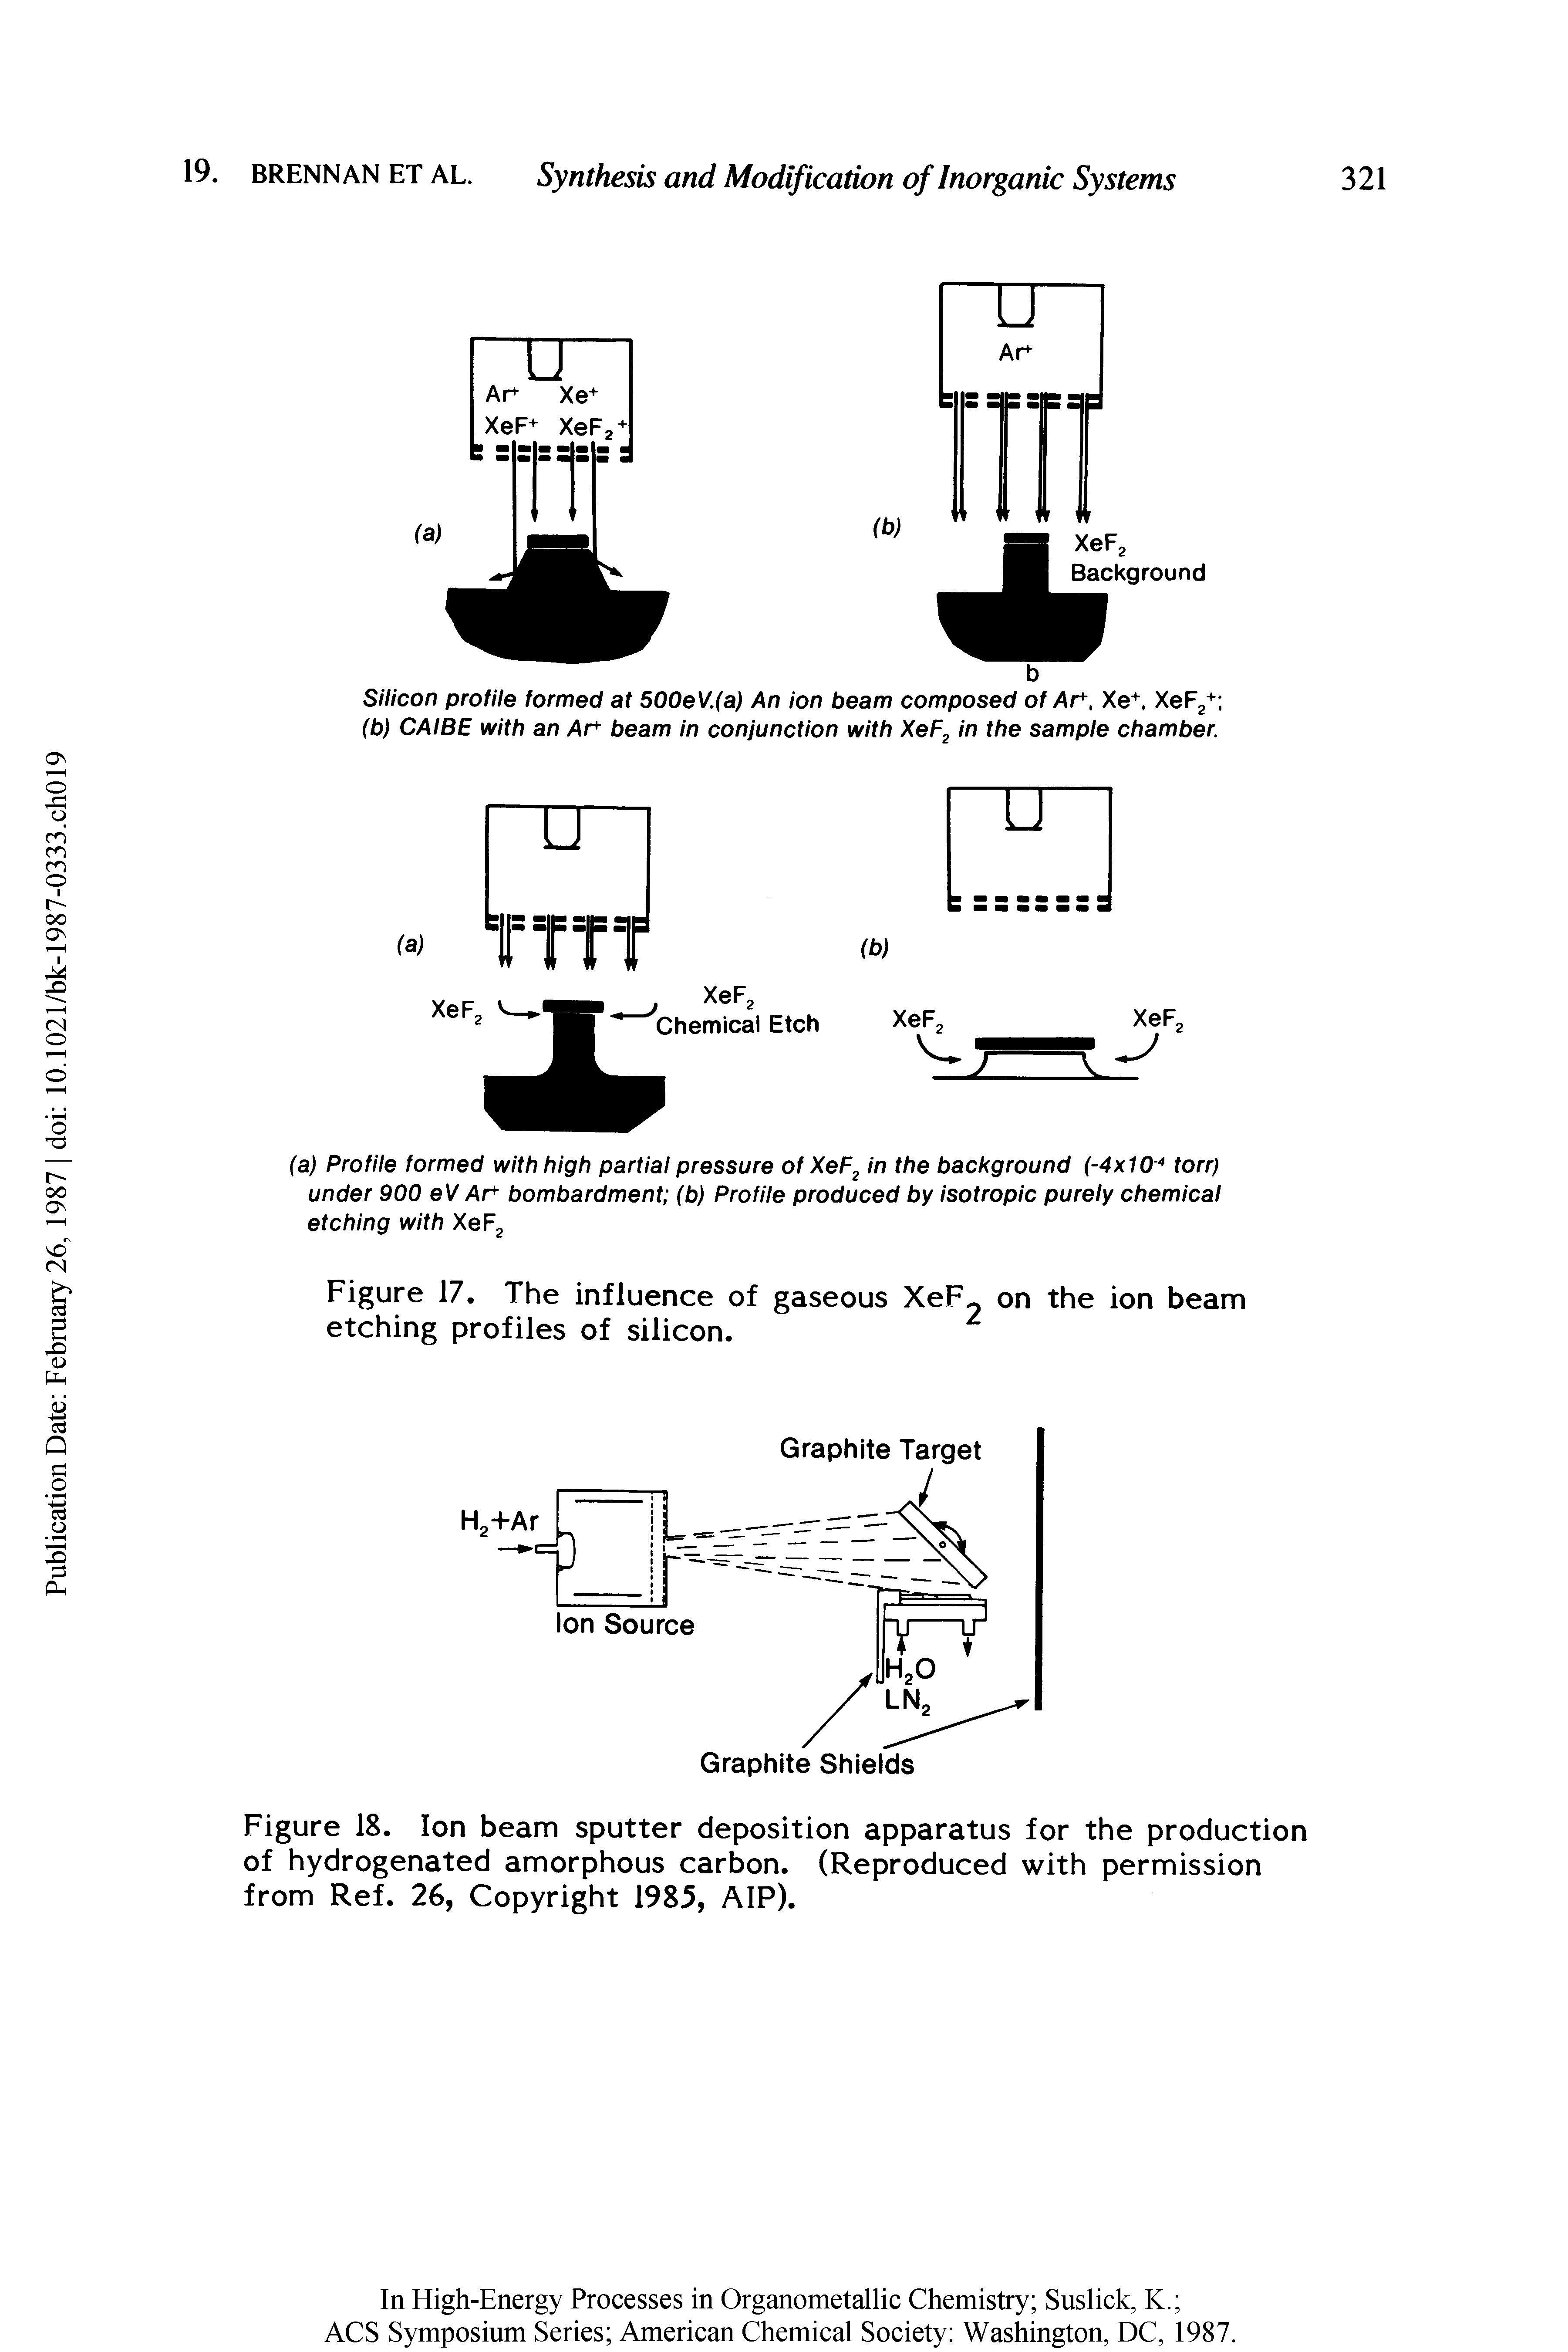 Figure 17. The influence of gaseous XeF on the ion beam etching profiles of silicon.